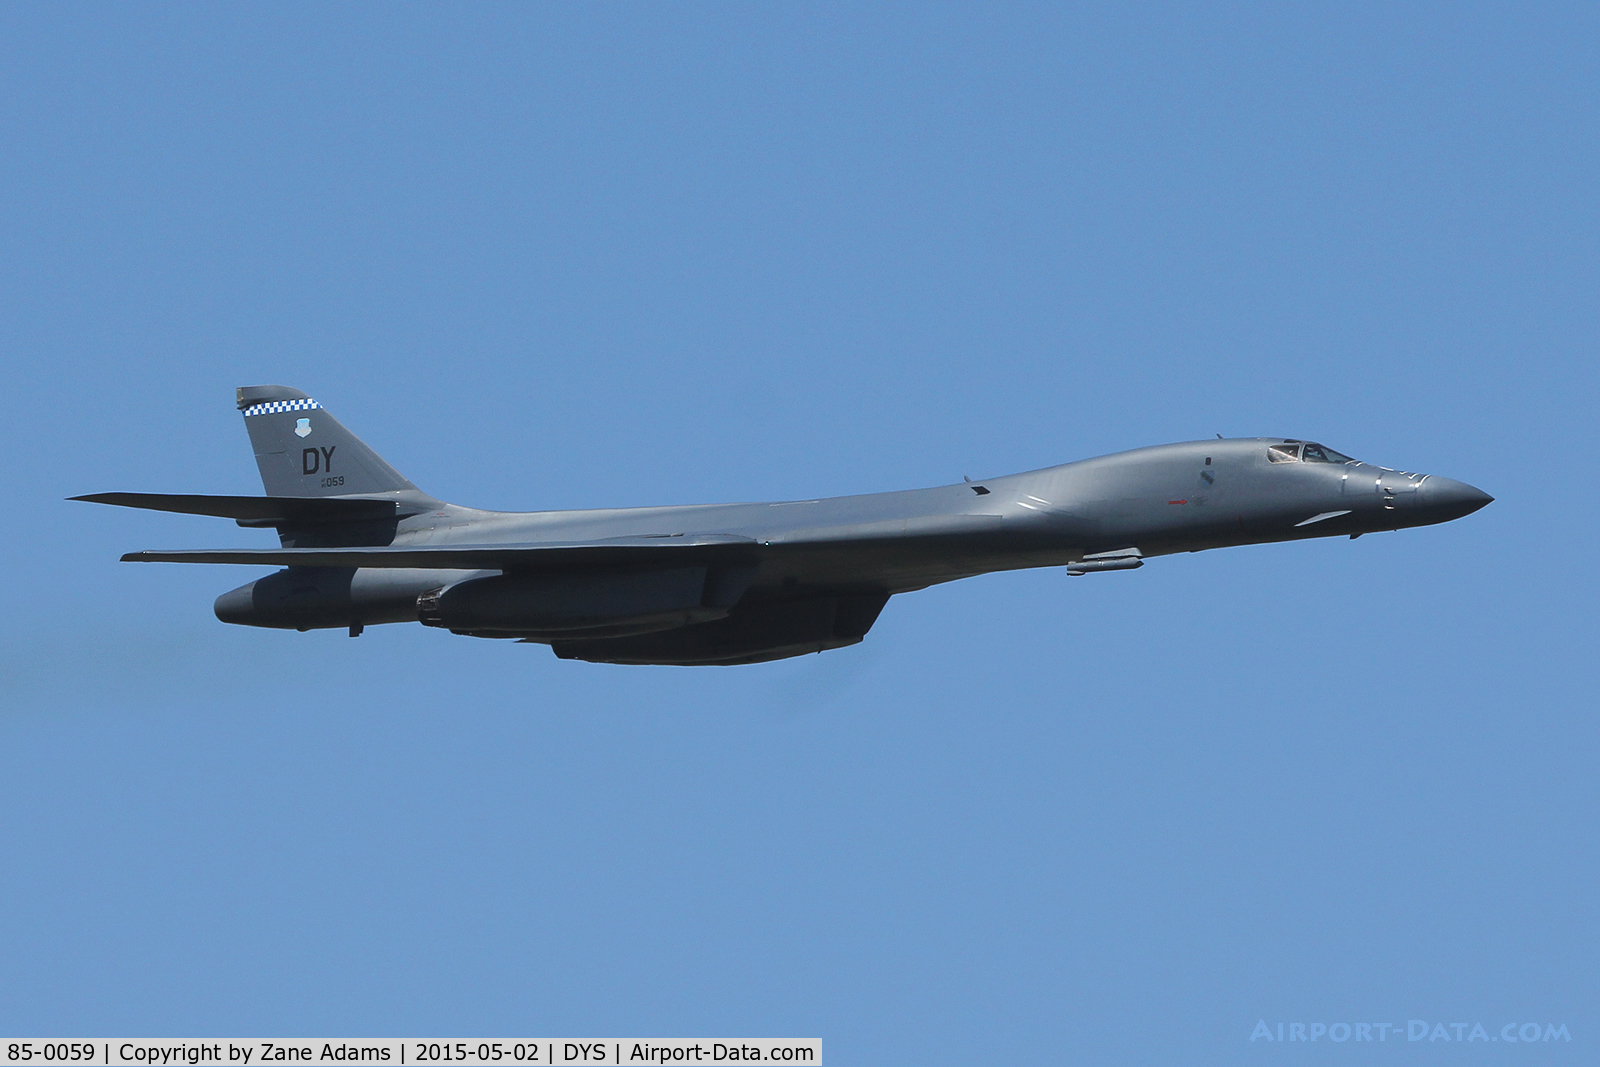 85-0059, 1985 Rockwell B-1B Lancer C/N 19, At the 2014 Big Country Airshow - Dyess AFB, TX